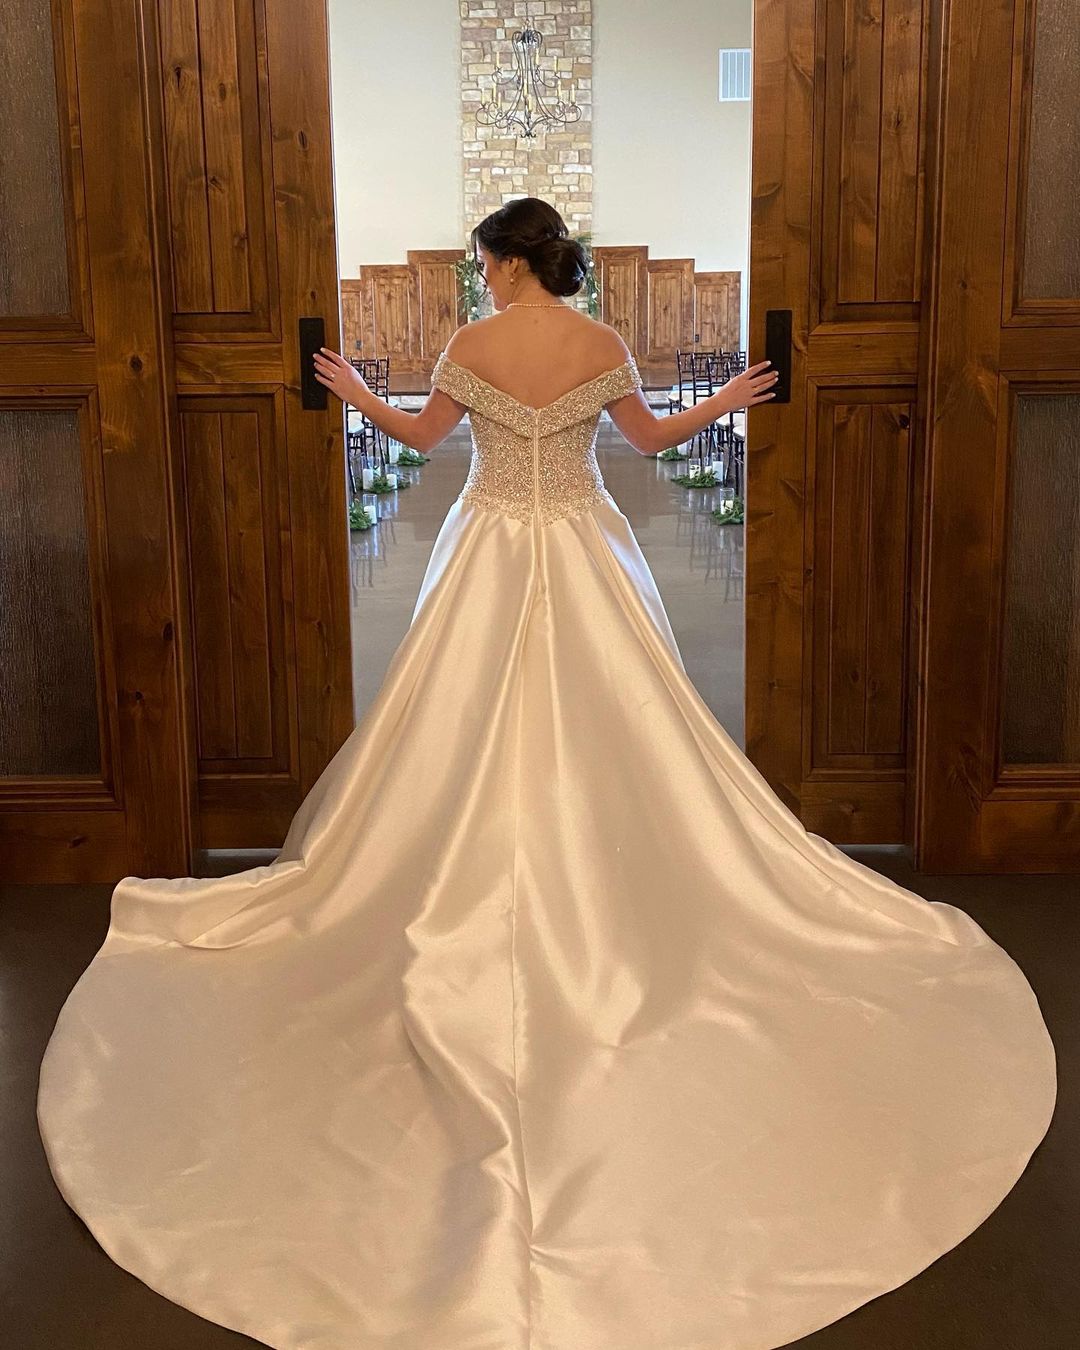 A bride in a white dress standing in front of a door.